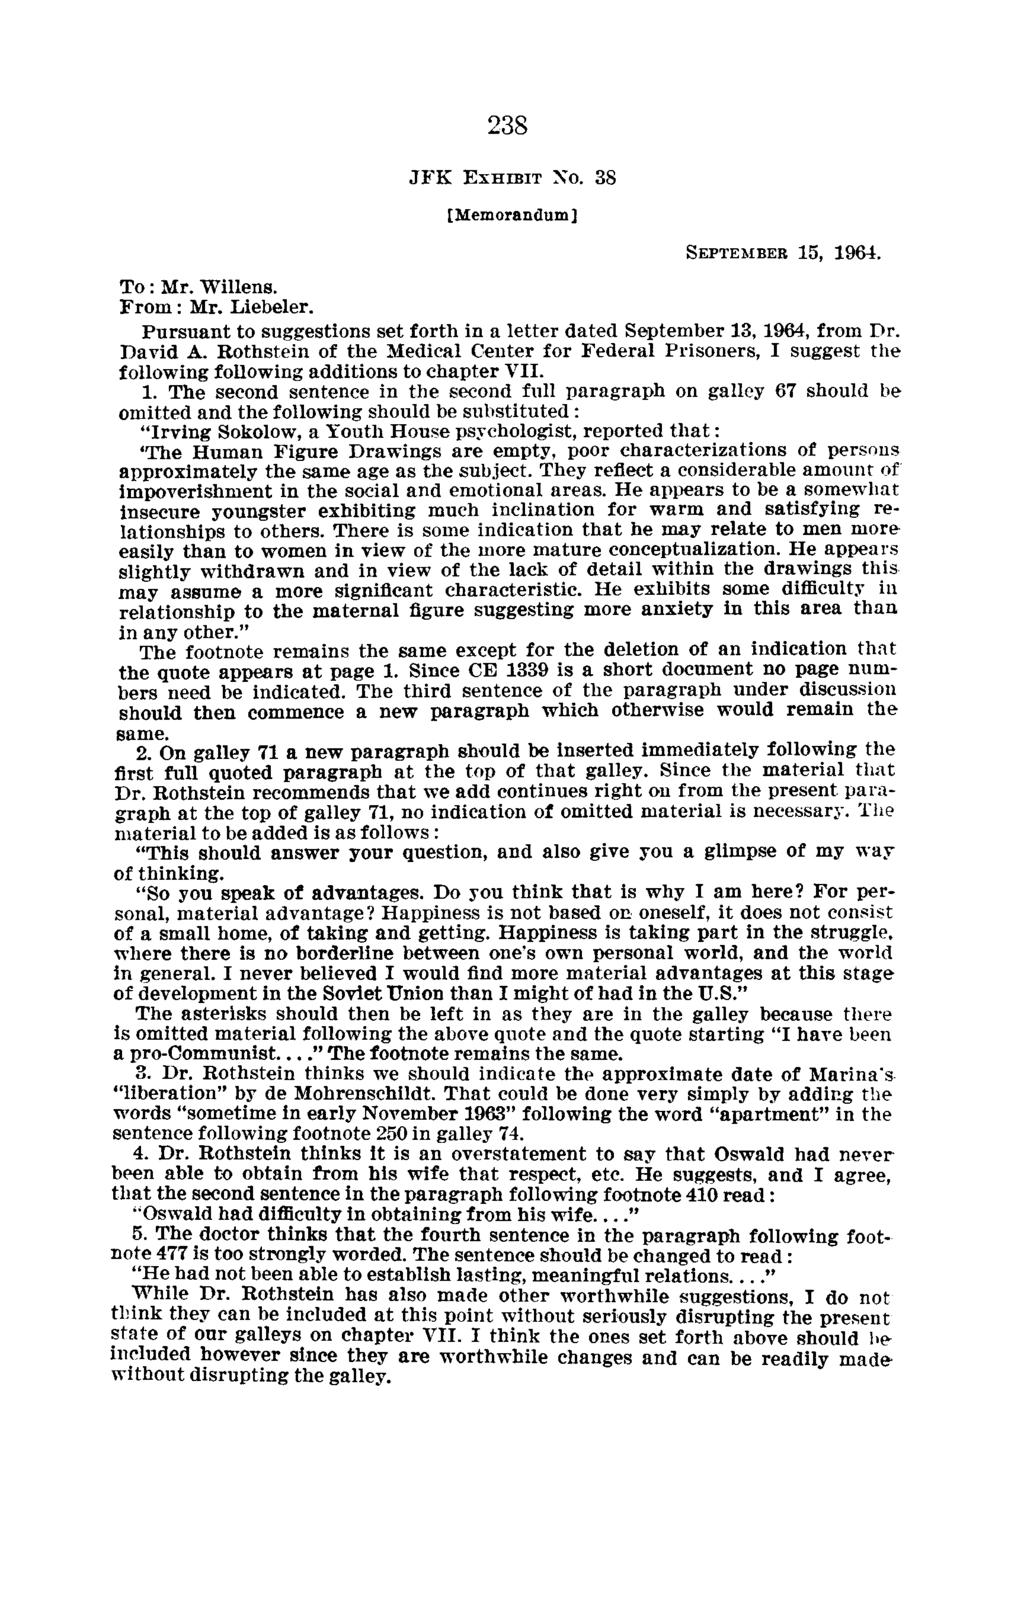 238 JFK EXHn3IT 'No 38 [Memorandum] SEPTEMBER 15, 1964 To : Mr Willens From : Mr Liebeler Pursuant to suggestions set forth in a letter dated September 13, 1964, from Dr David A Rothstein of the